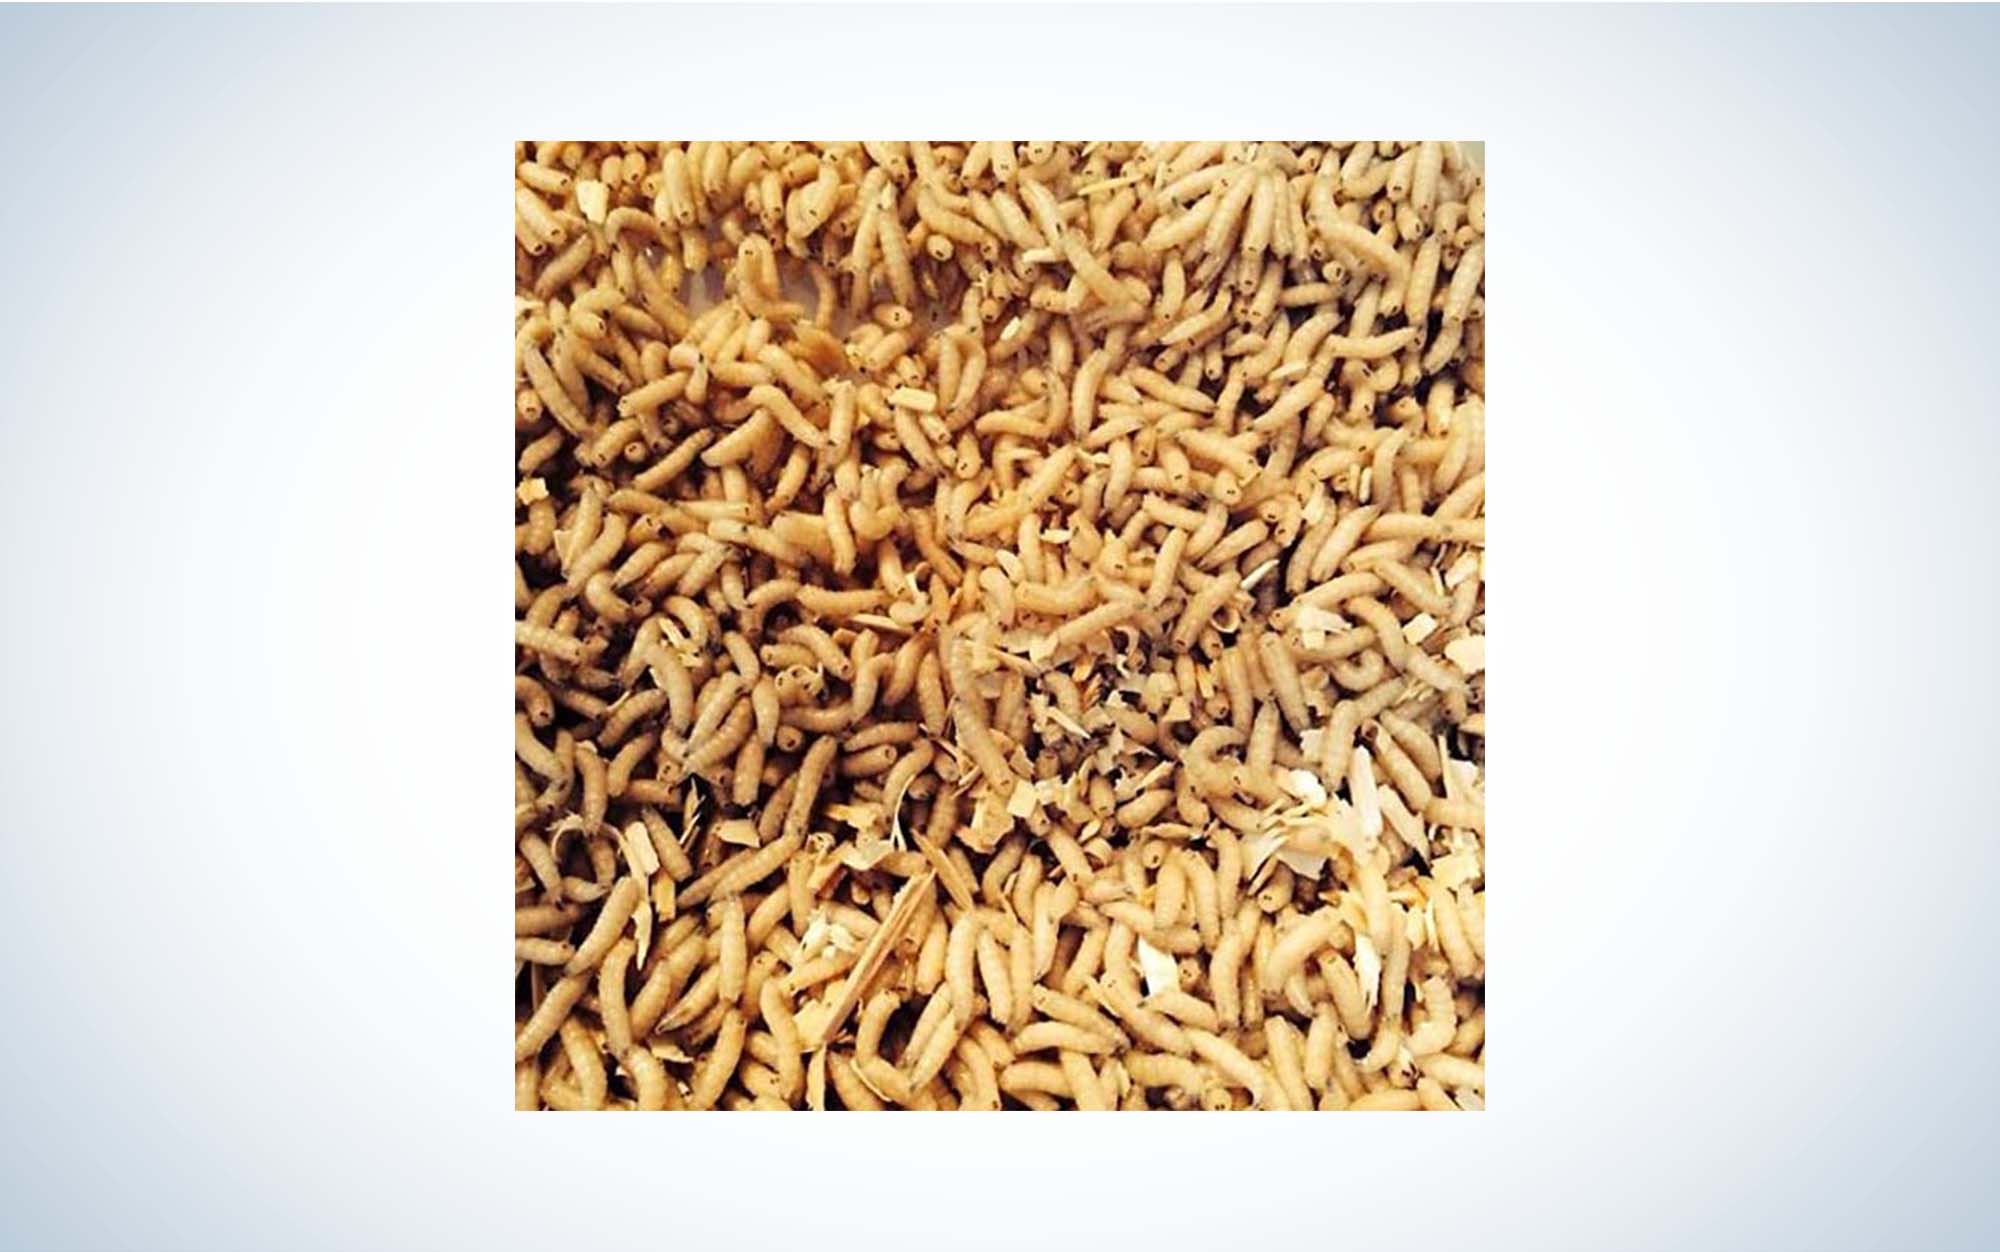 Maggots, Mealworms, Wax worms